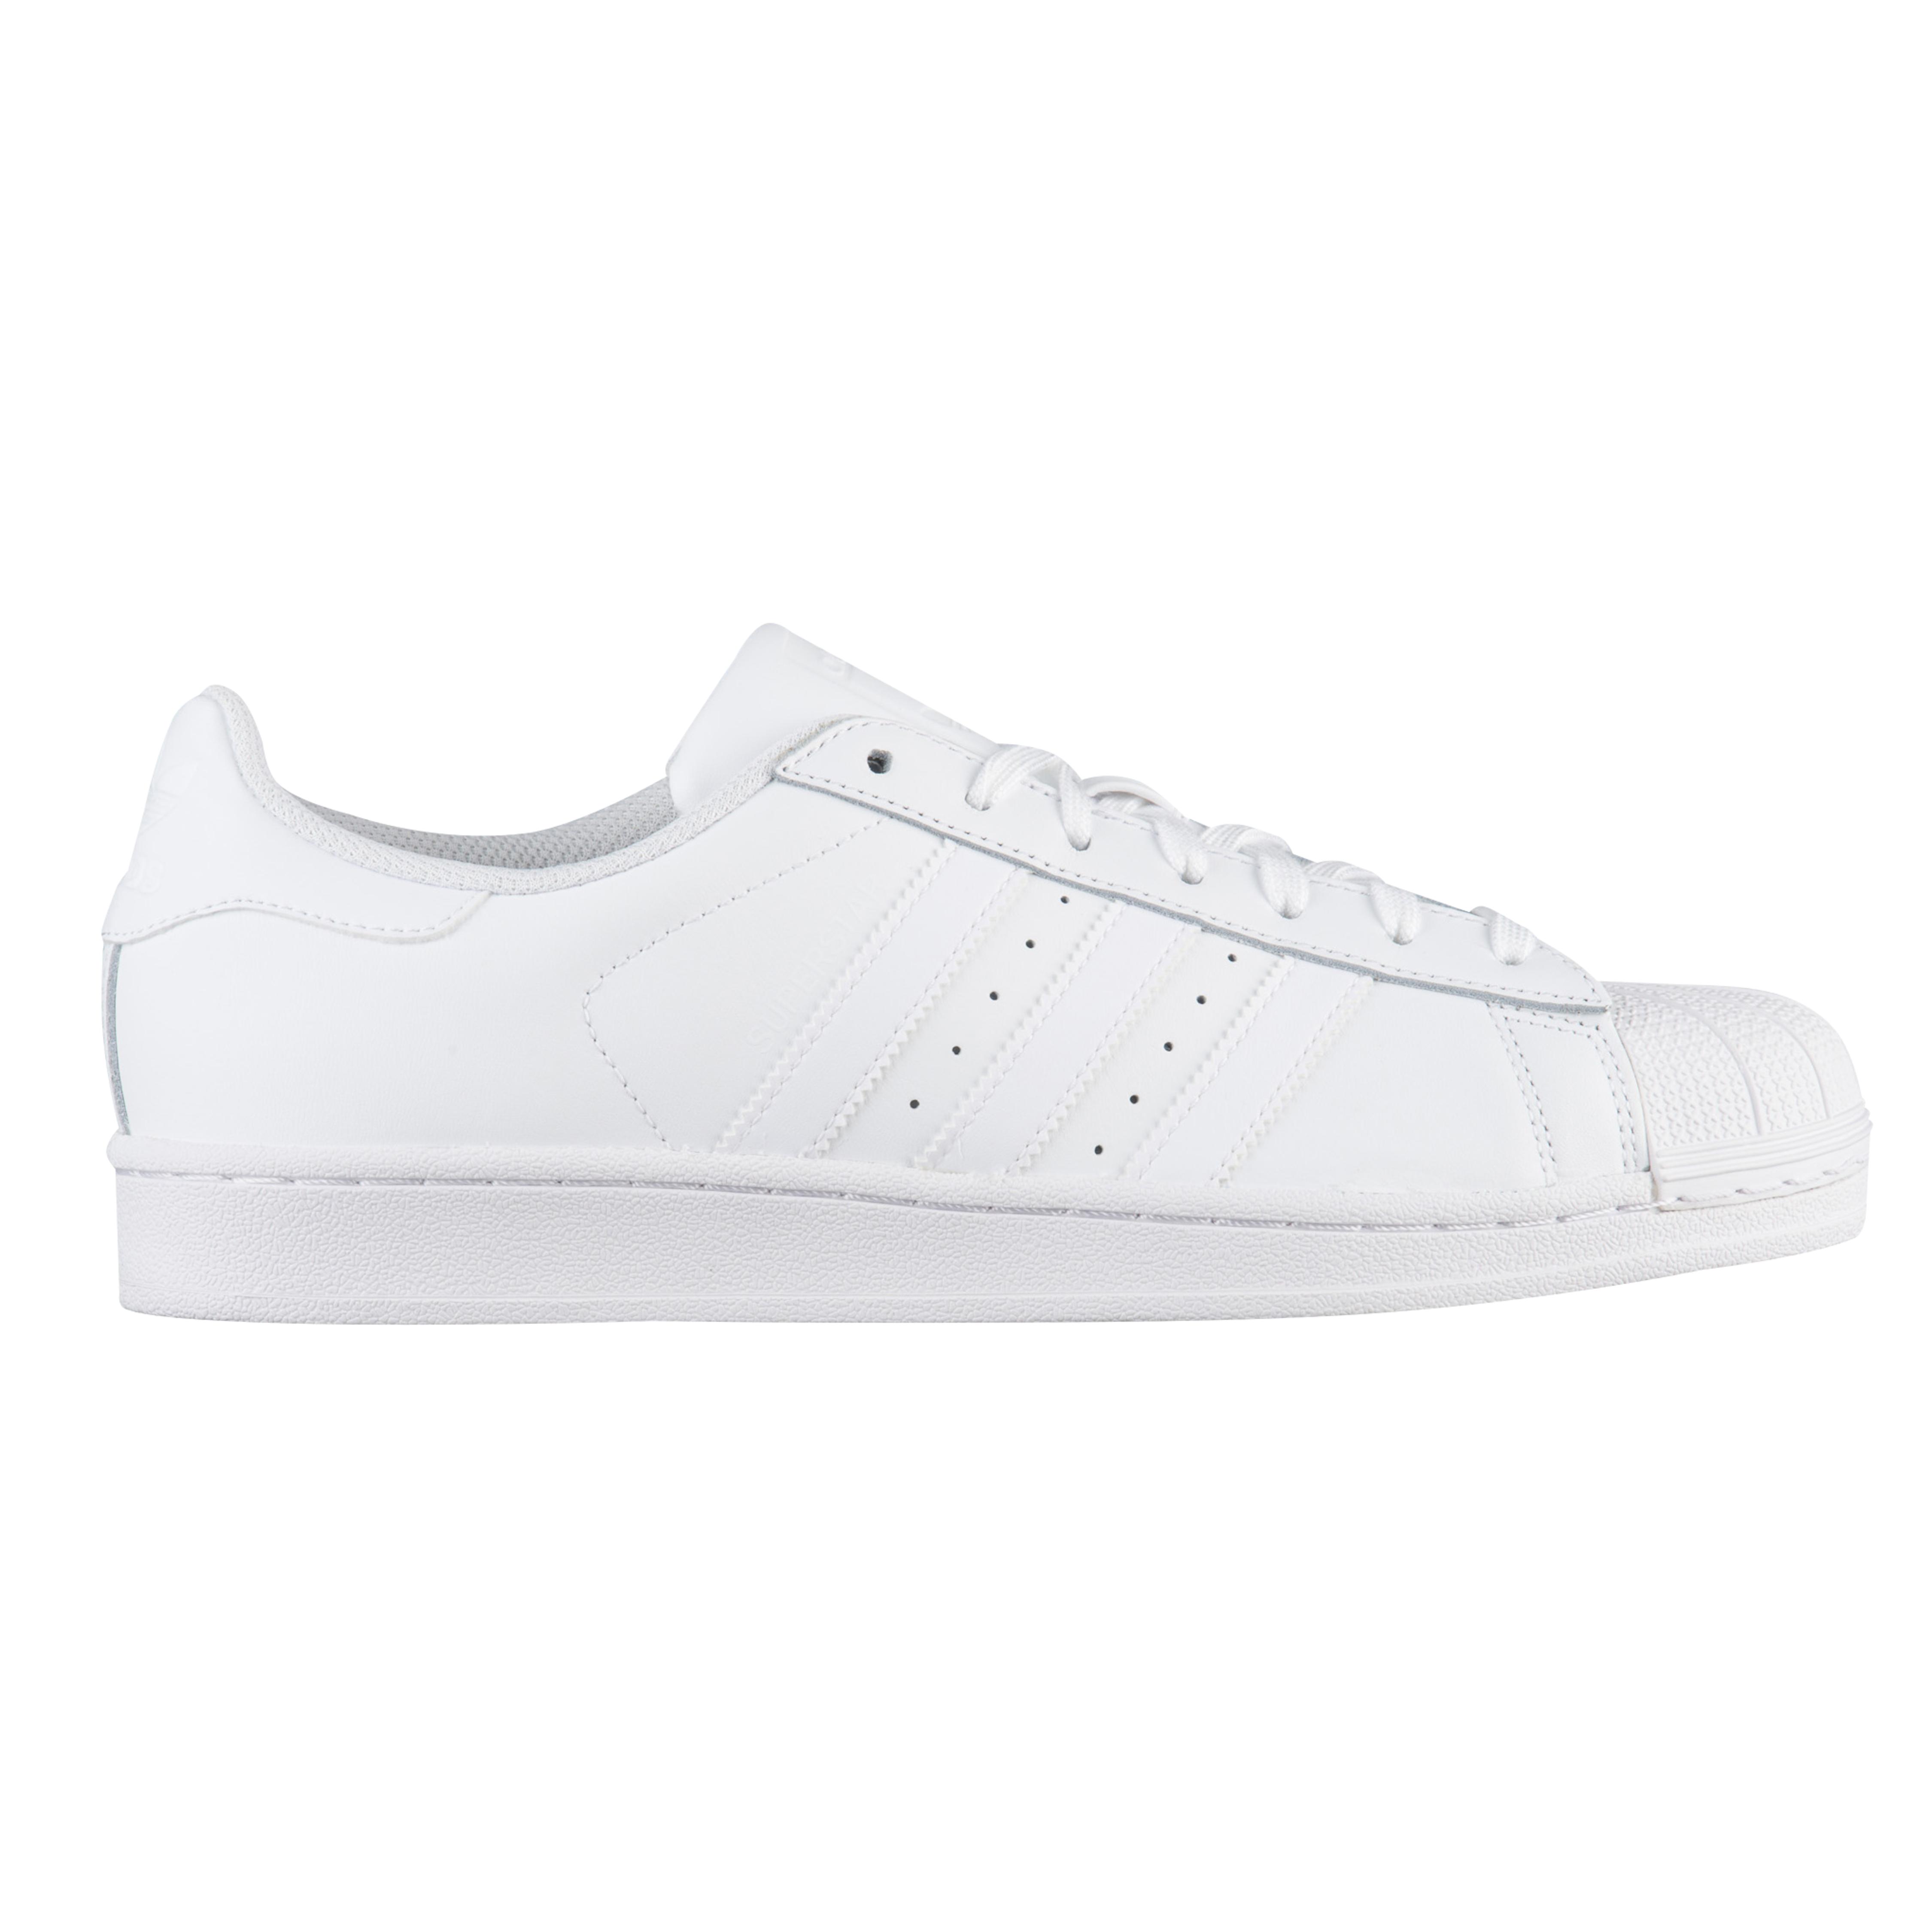 adidas Originals Leather Superstar - Basketball Shoes in White/White ...